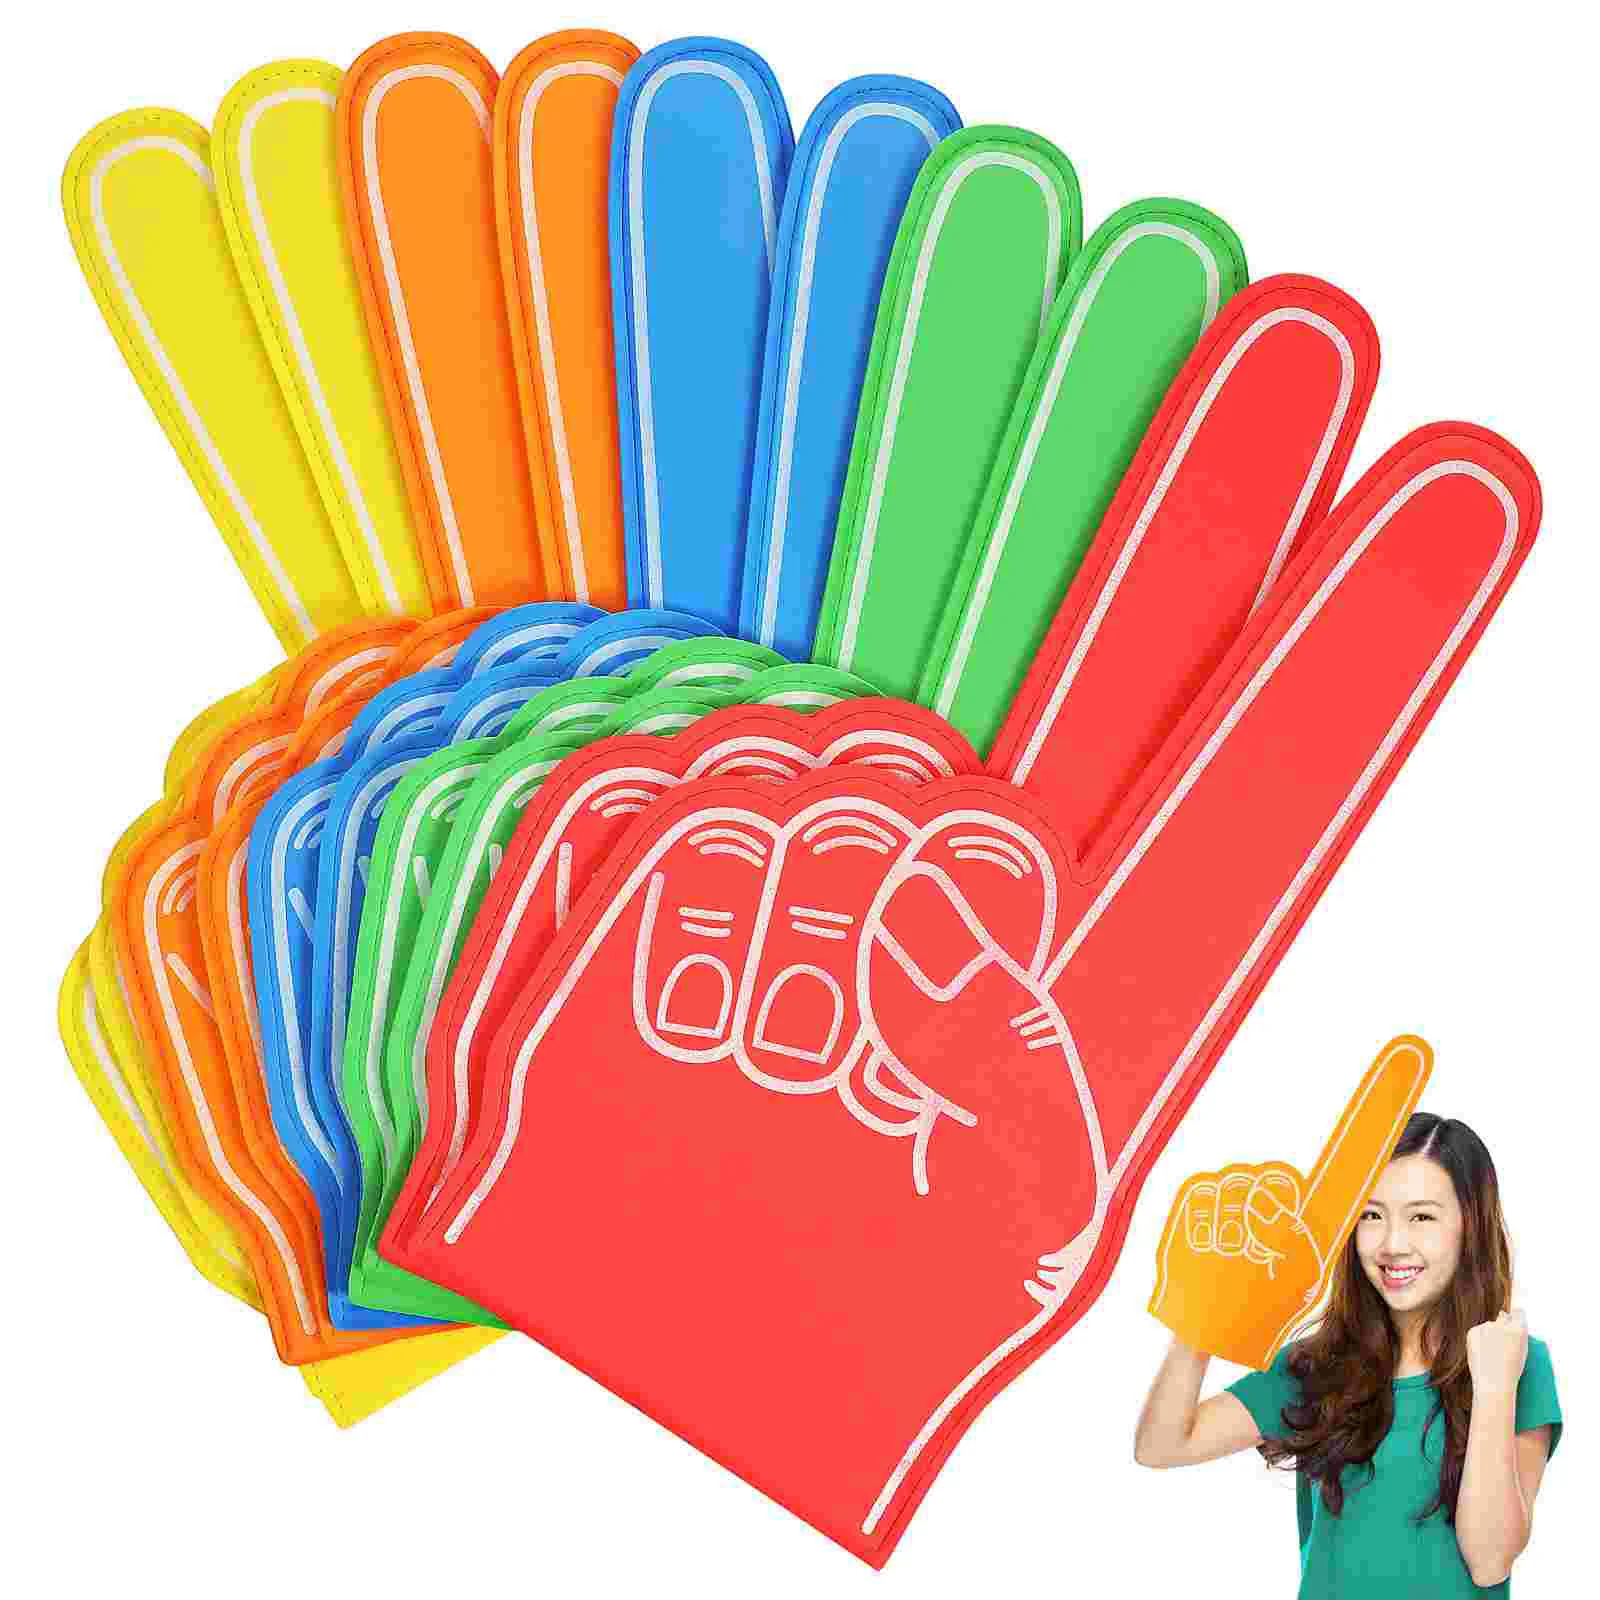 

Number 1 Foam Fingers Giant Hands Cheering Clapper Colored Universal Party Props